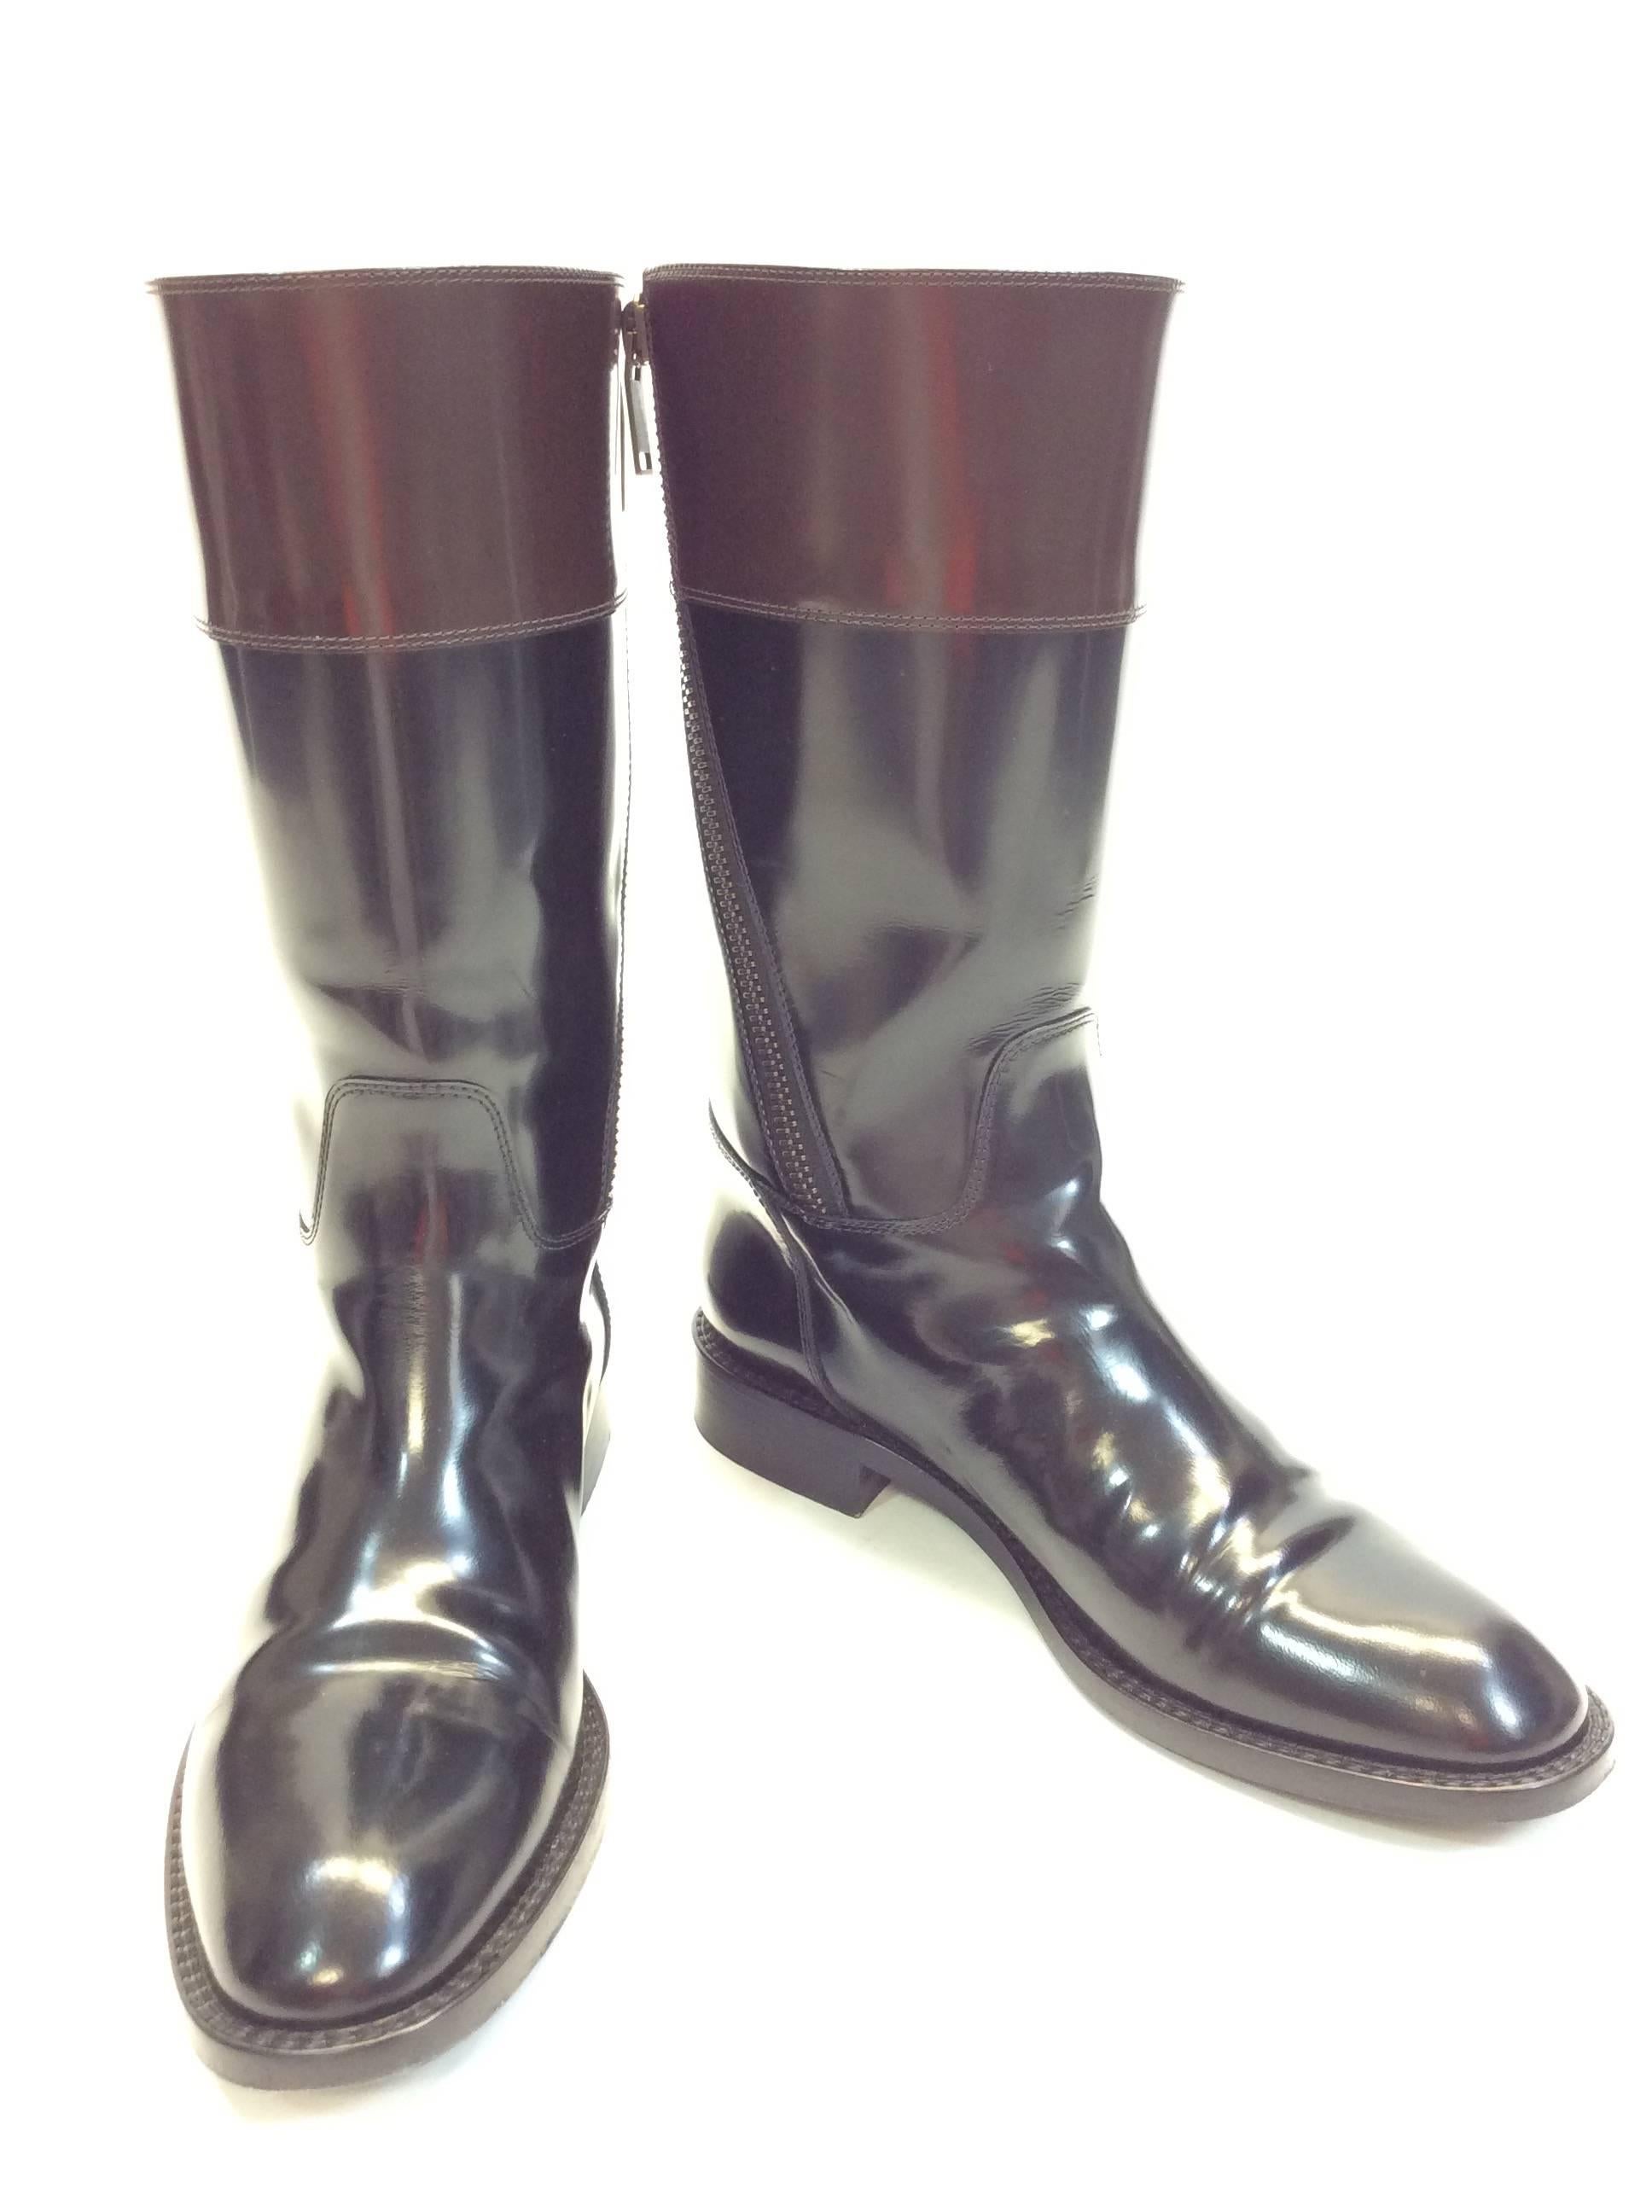 Black and Brown Patent Leather
Brown at top of Boot
Angled zipper on side for Closure 
Saint Laurent Logo on side of Boot
Minimal wear to Bottom of Shoe
4" Inch Sole
12" Inches High